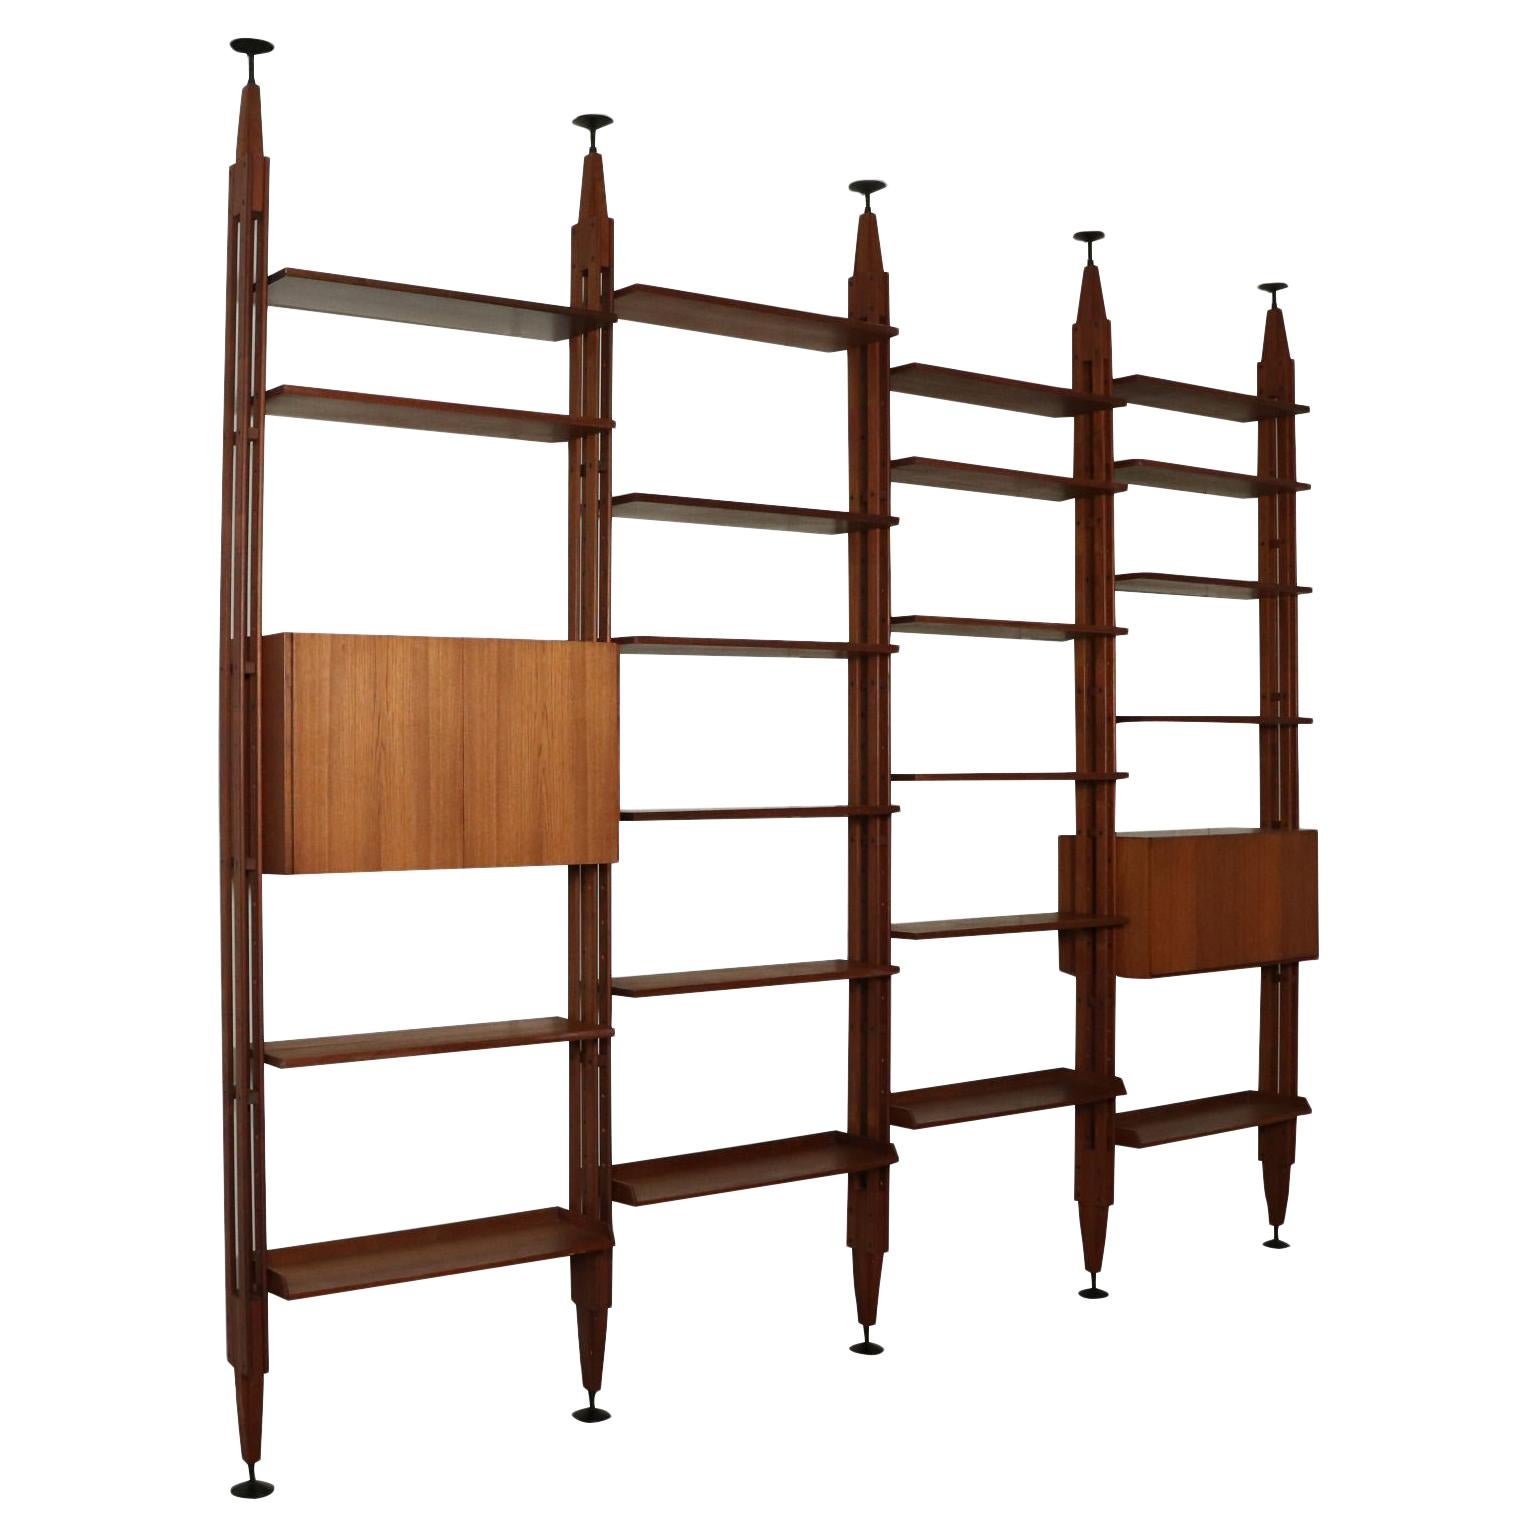 Floor-to-Ceiling Bookcase by Franco Albini Vintage Design, Italy, 1960s